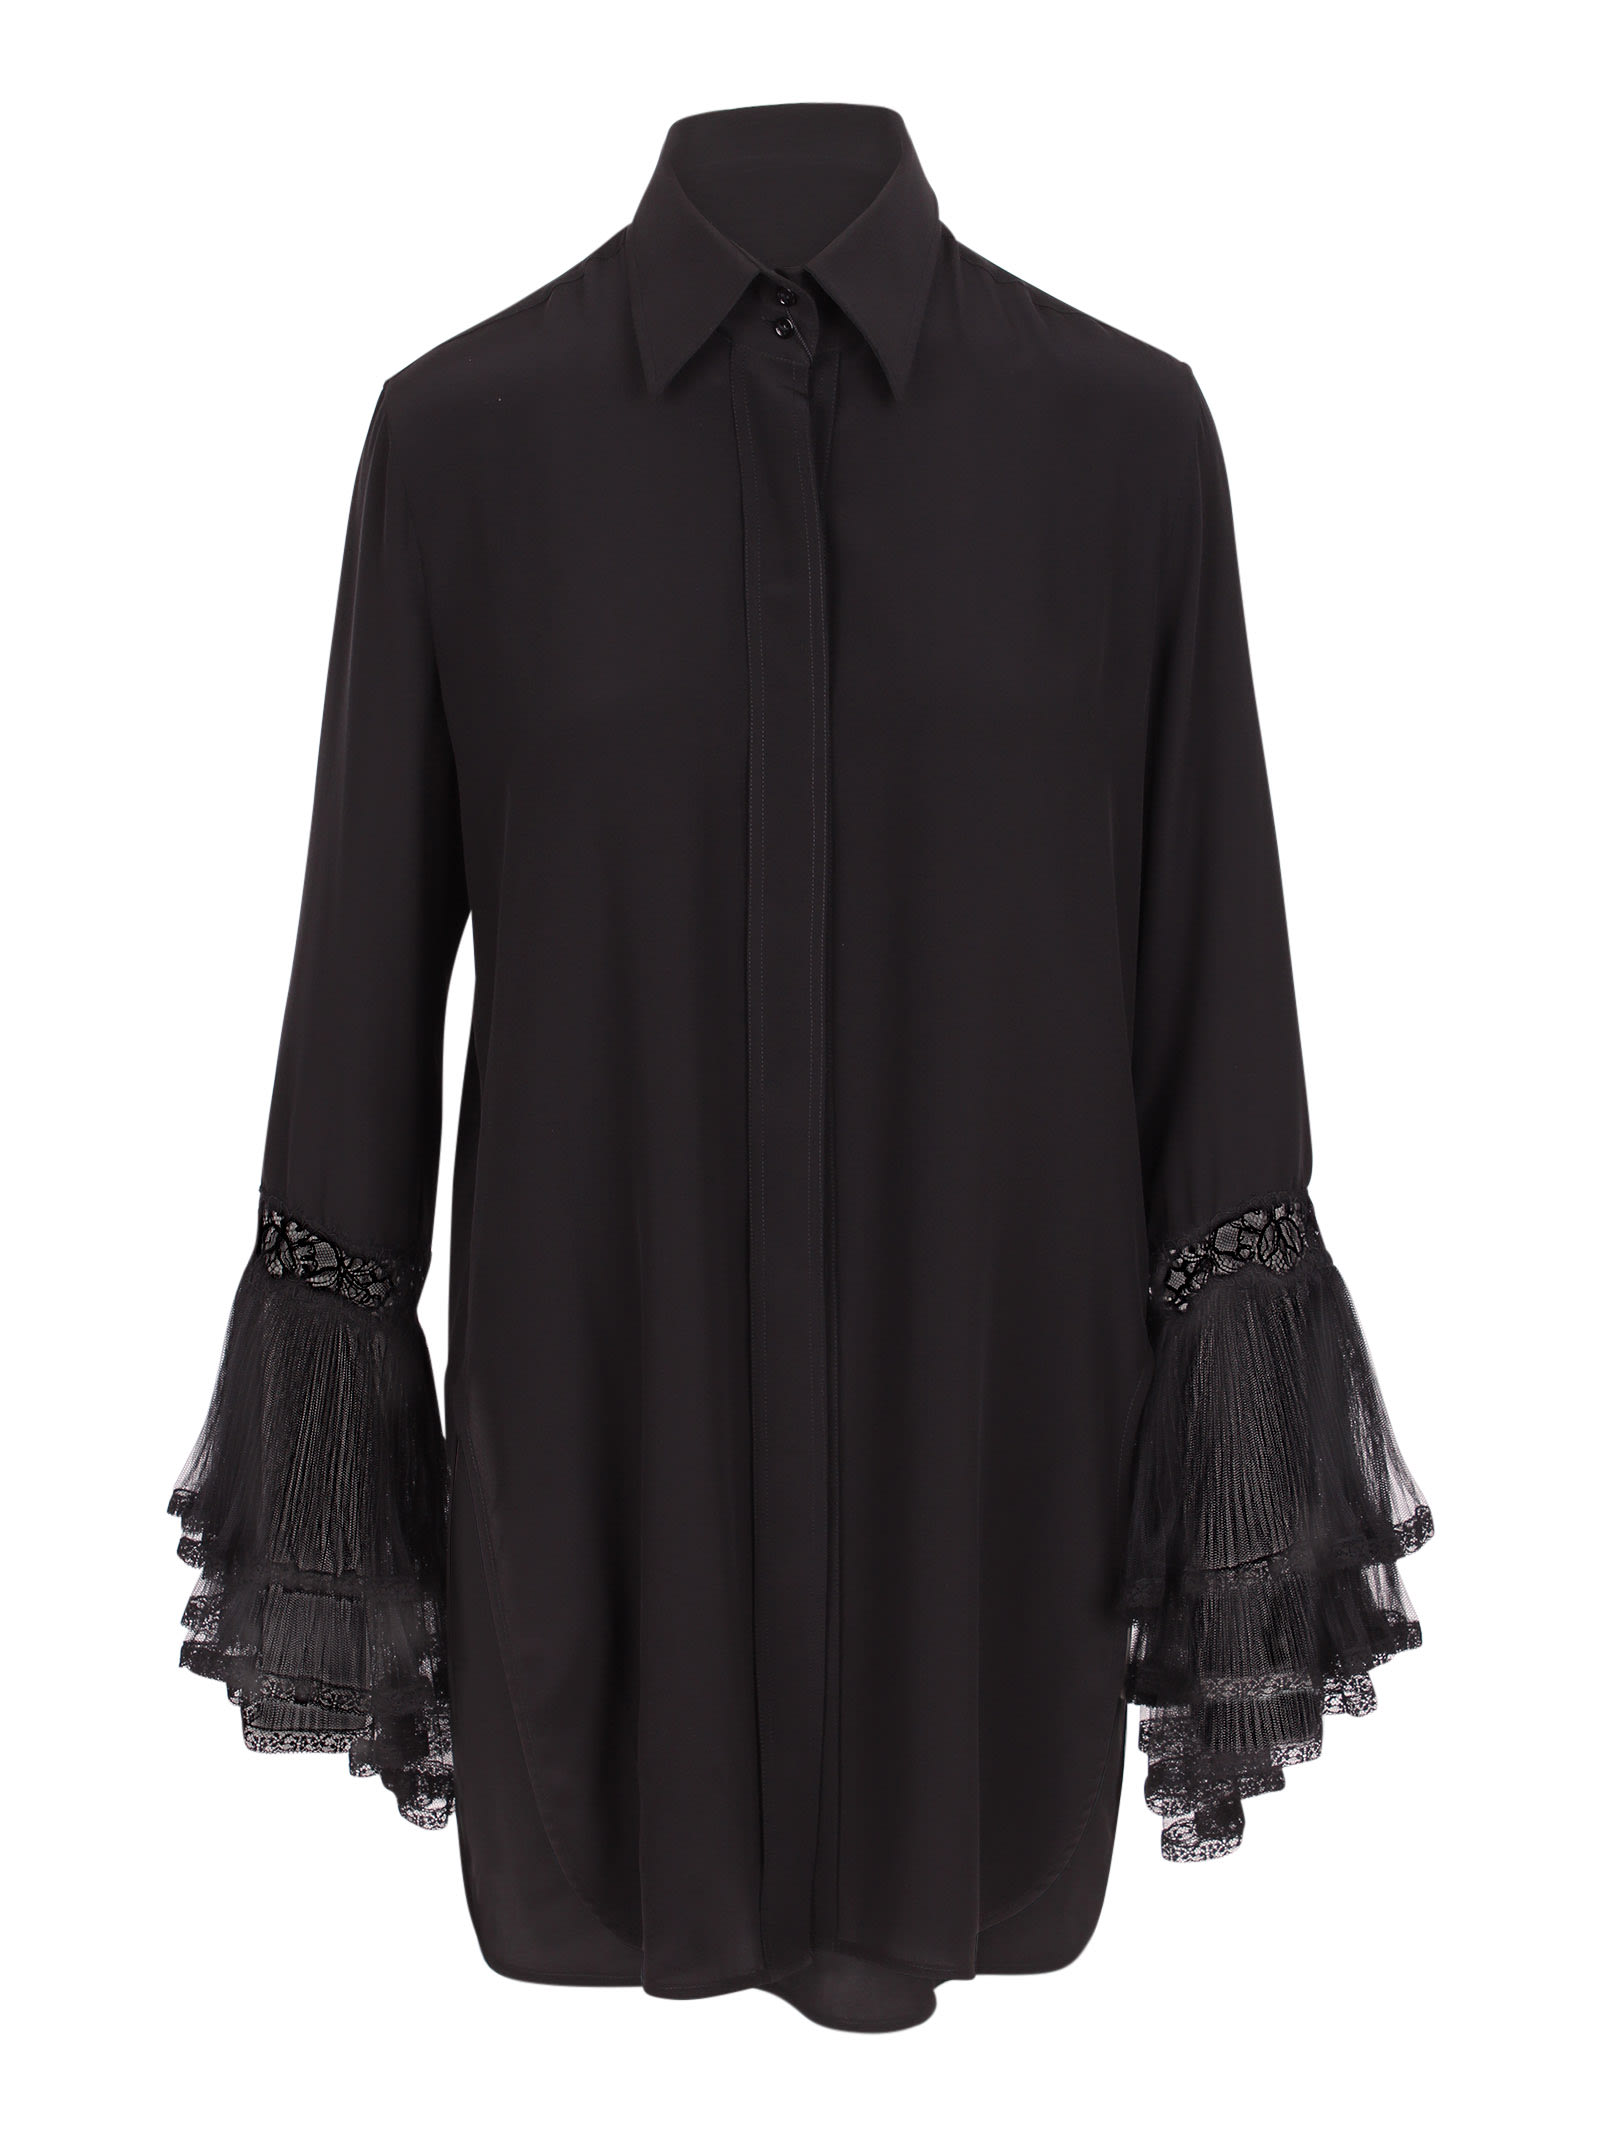 Ermanno Scervino Silk Shirt With Lace Flounced Cuffs